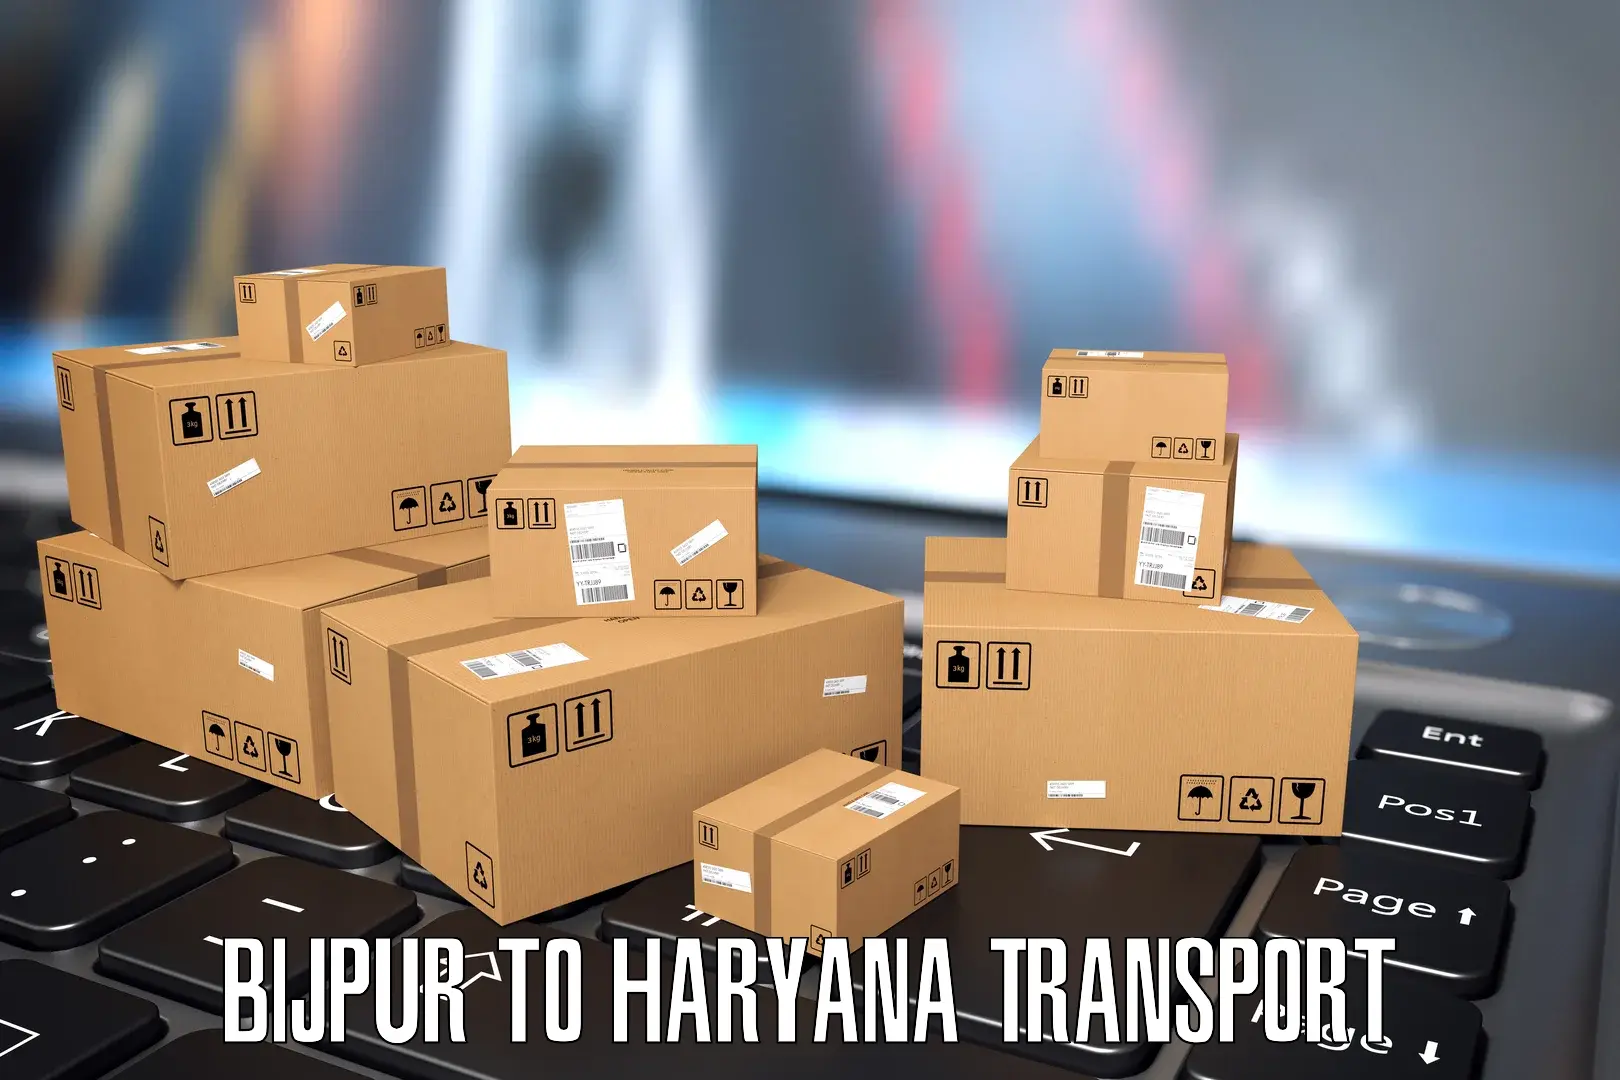 Air freight transport services Bijpur to NCR Haryana